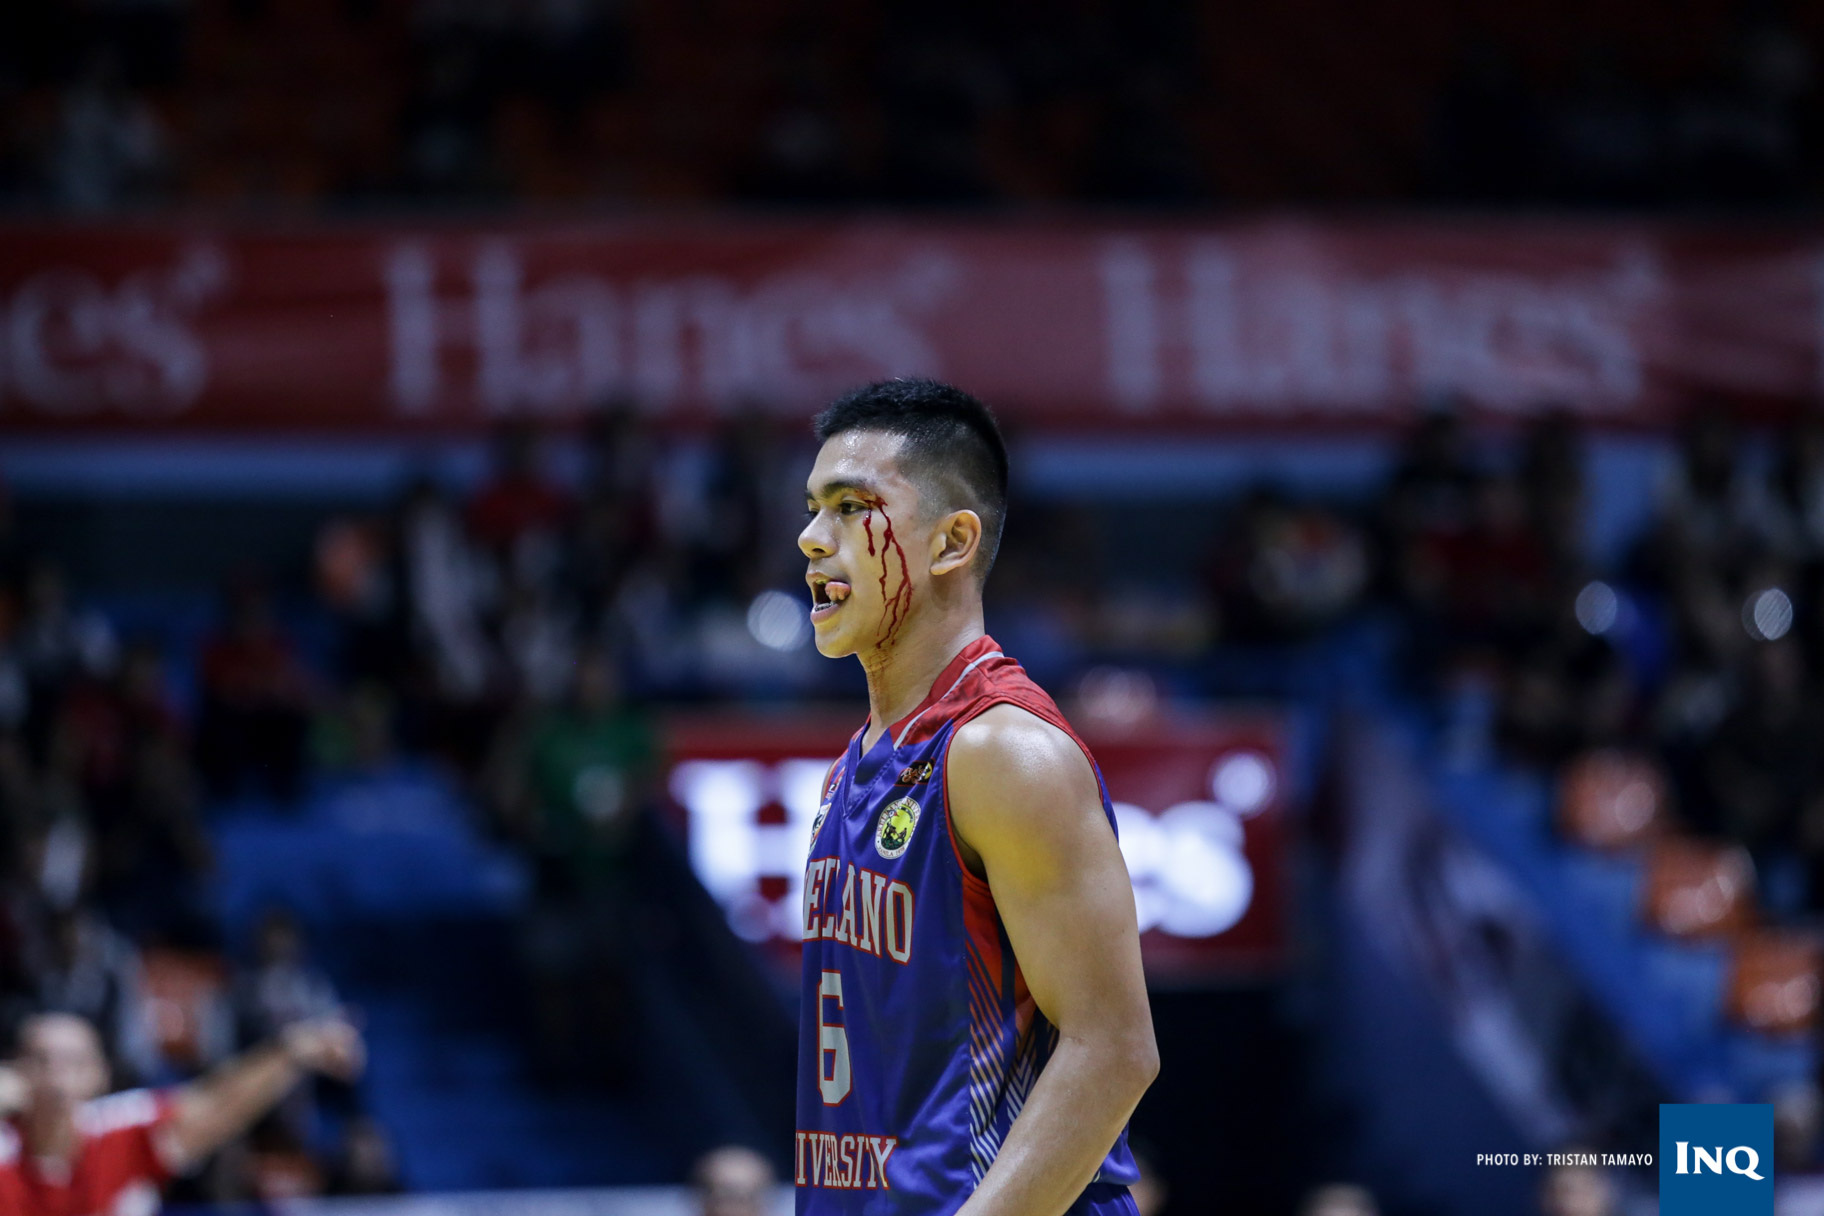 A wounded Jiovani Jalalon plays on. Photo by Tristan Tamayo/INQUIRER.net